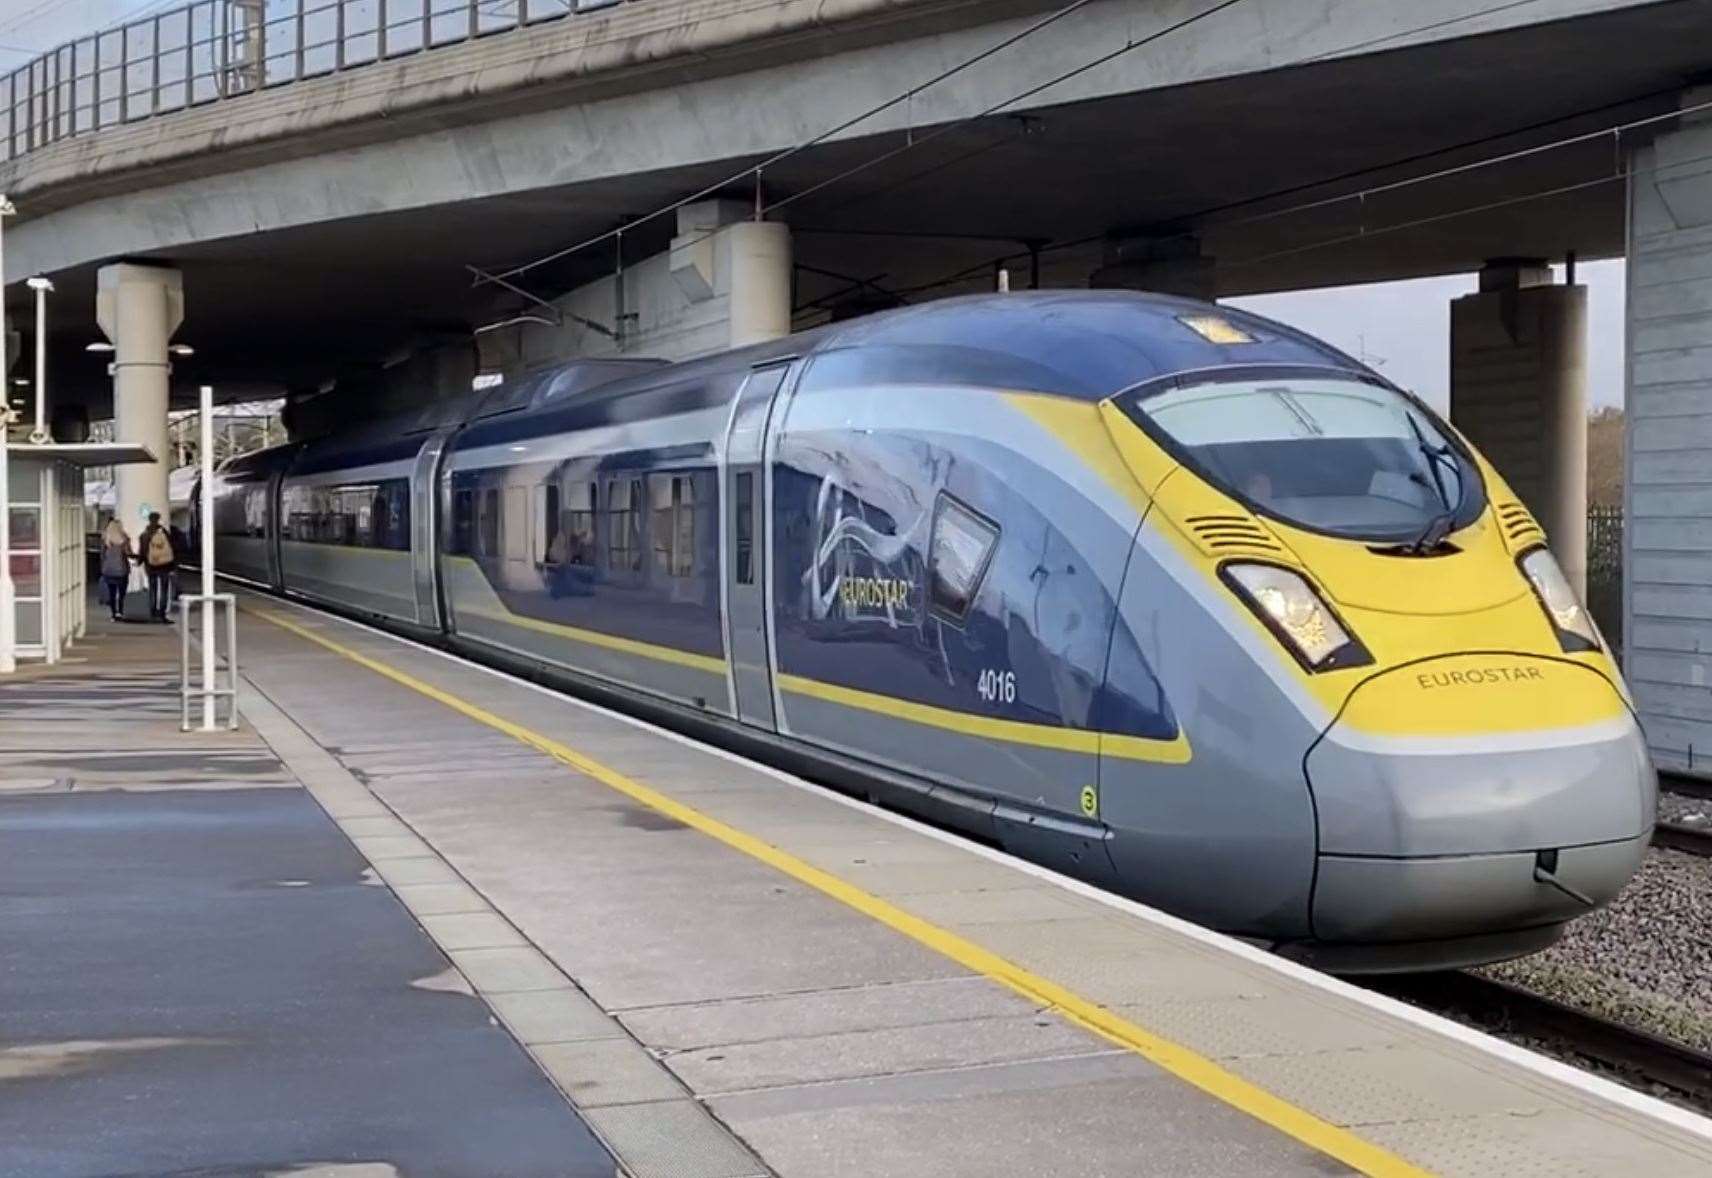 Eurostar have said it will not stop in Kent for "two to three years". Photo: Steve Salter